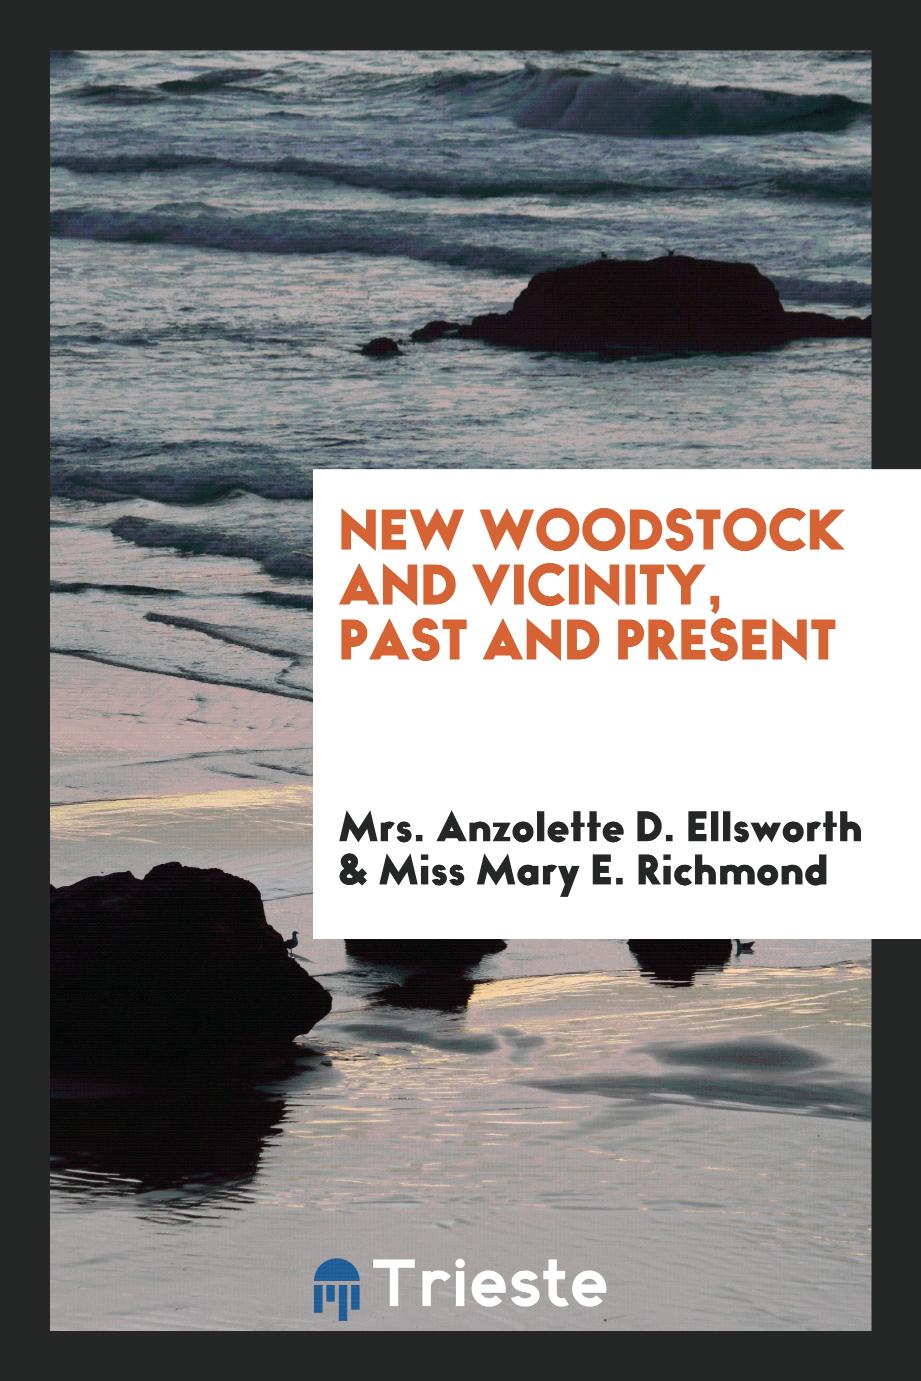 New Woodstock and vicinity, past and present